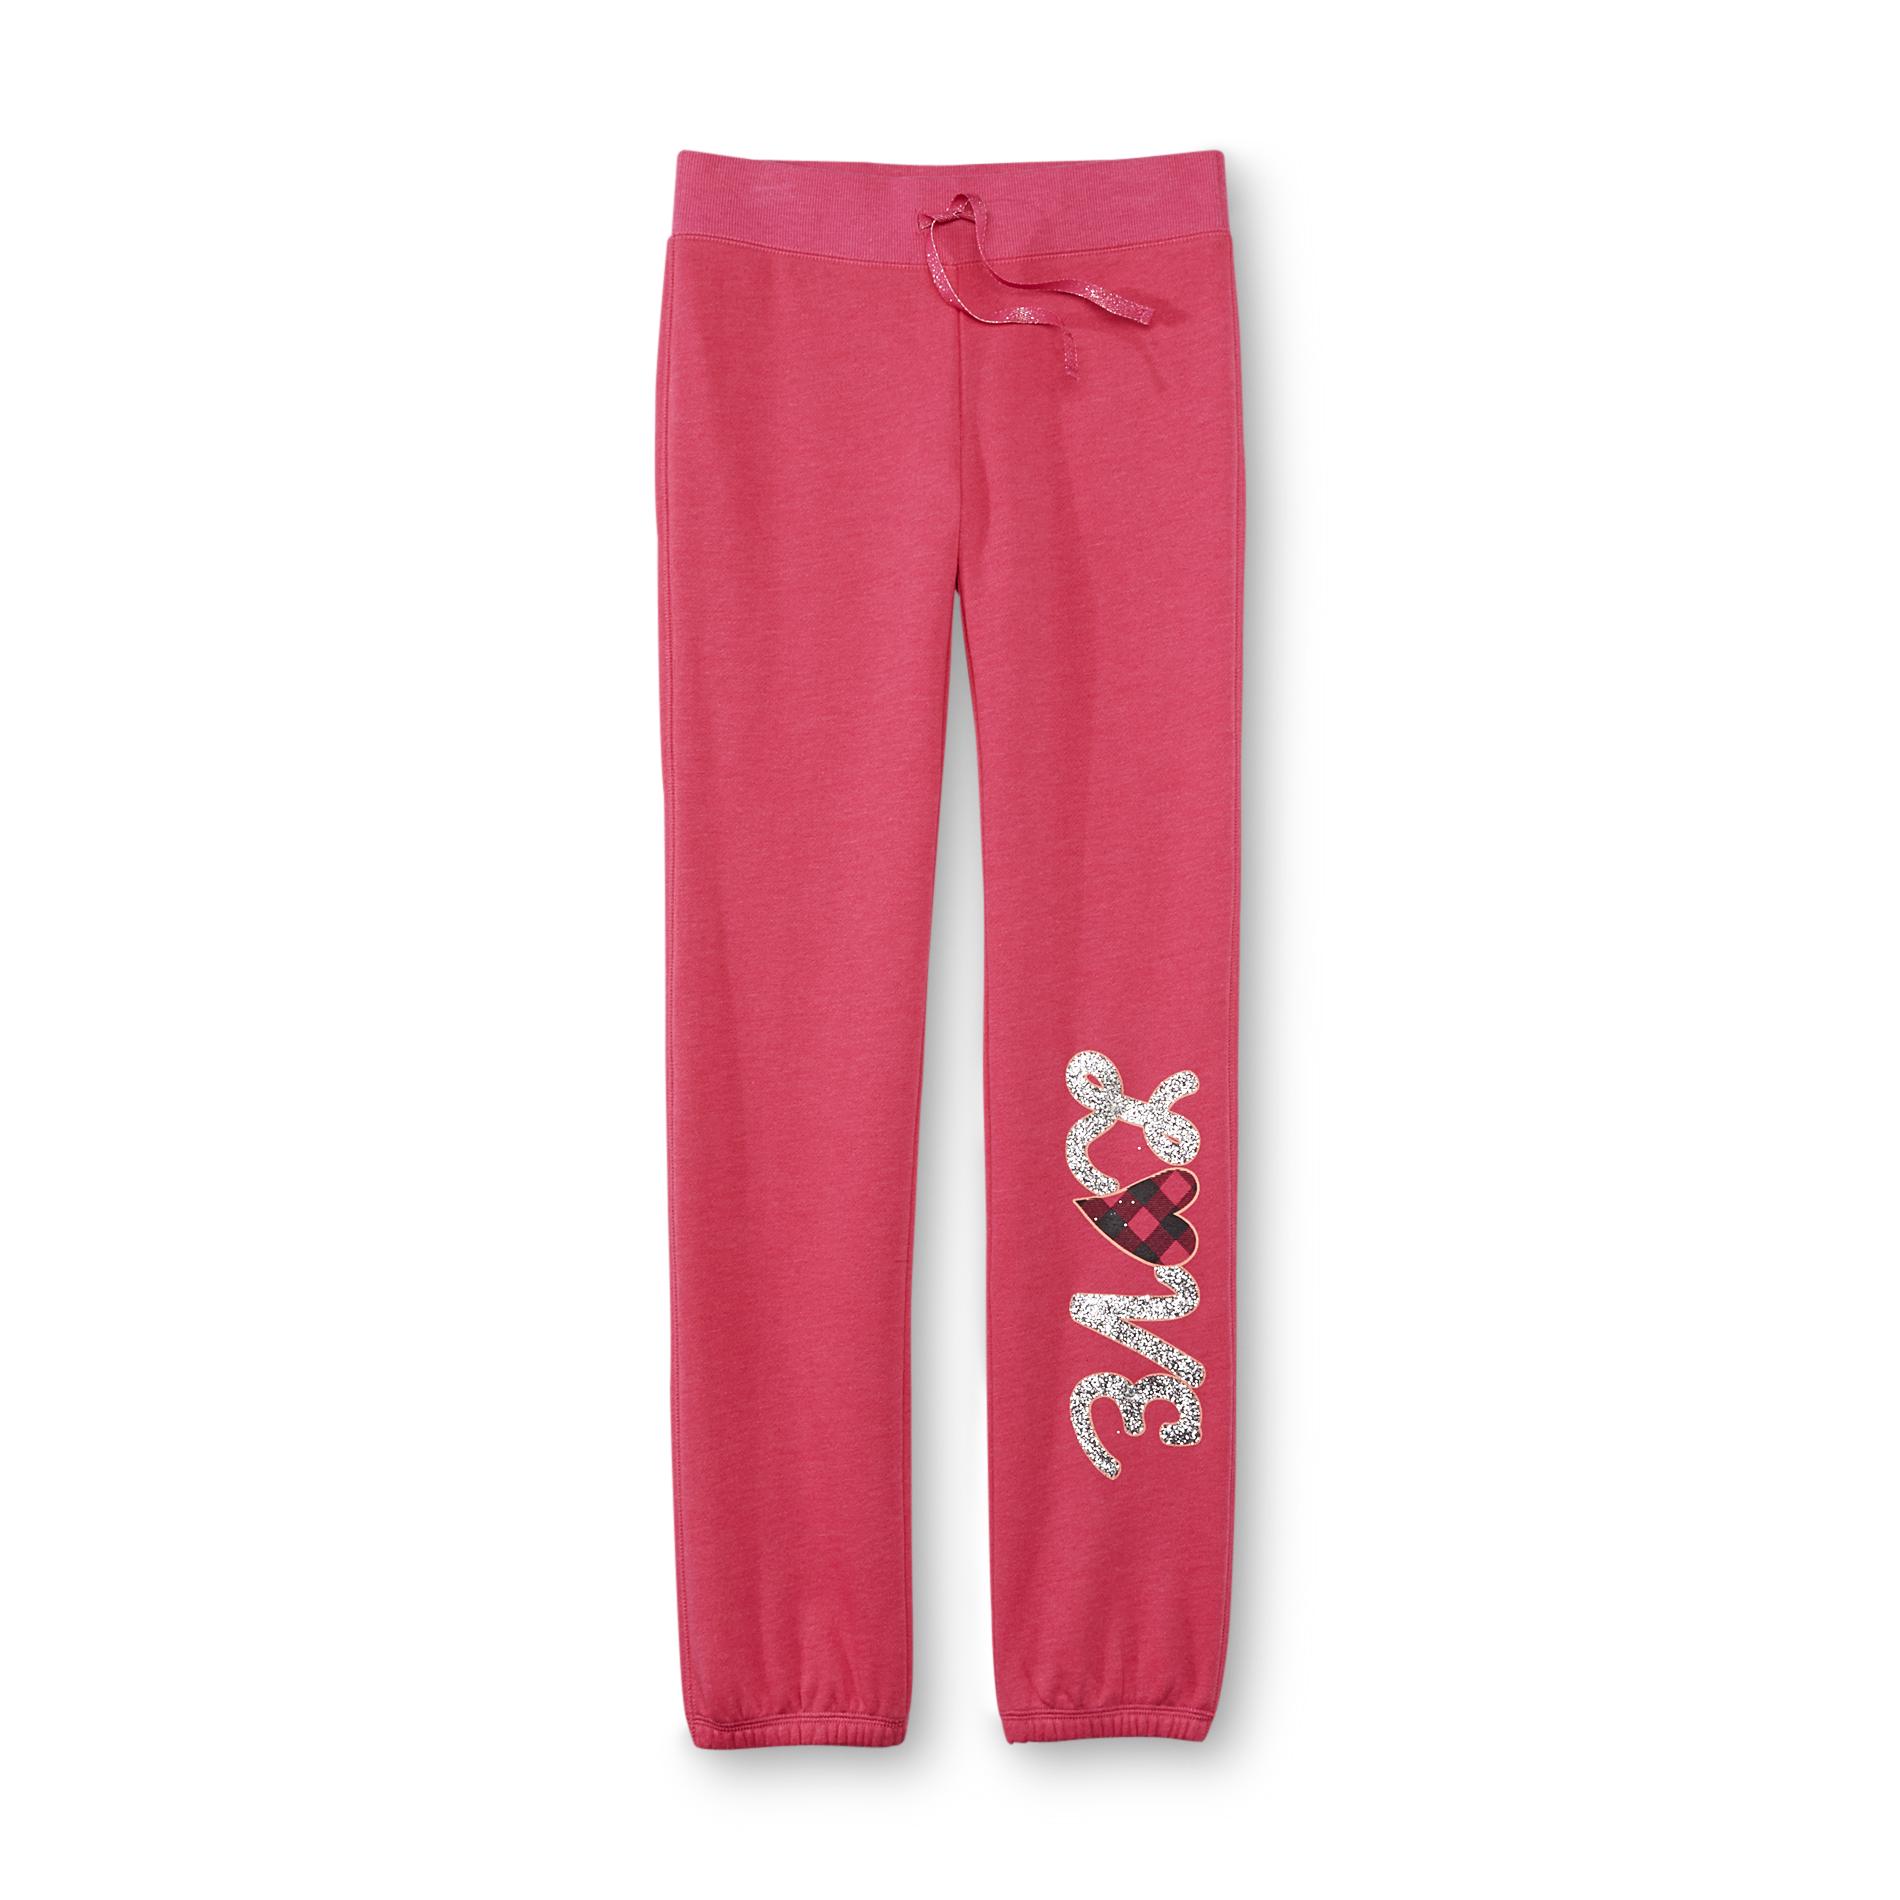 Canyon River Blues Girl's Embellished Sweatpants - Love